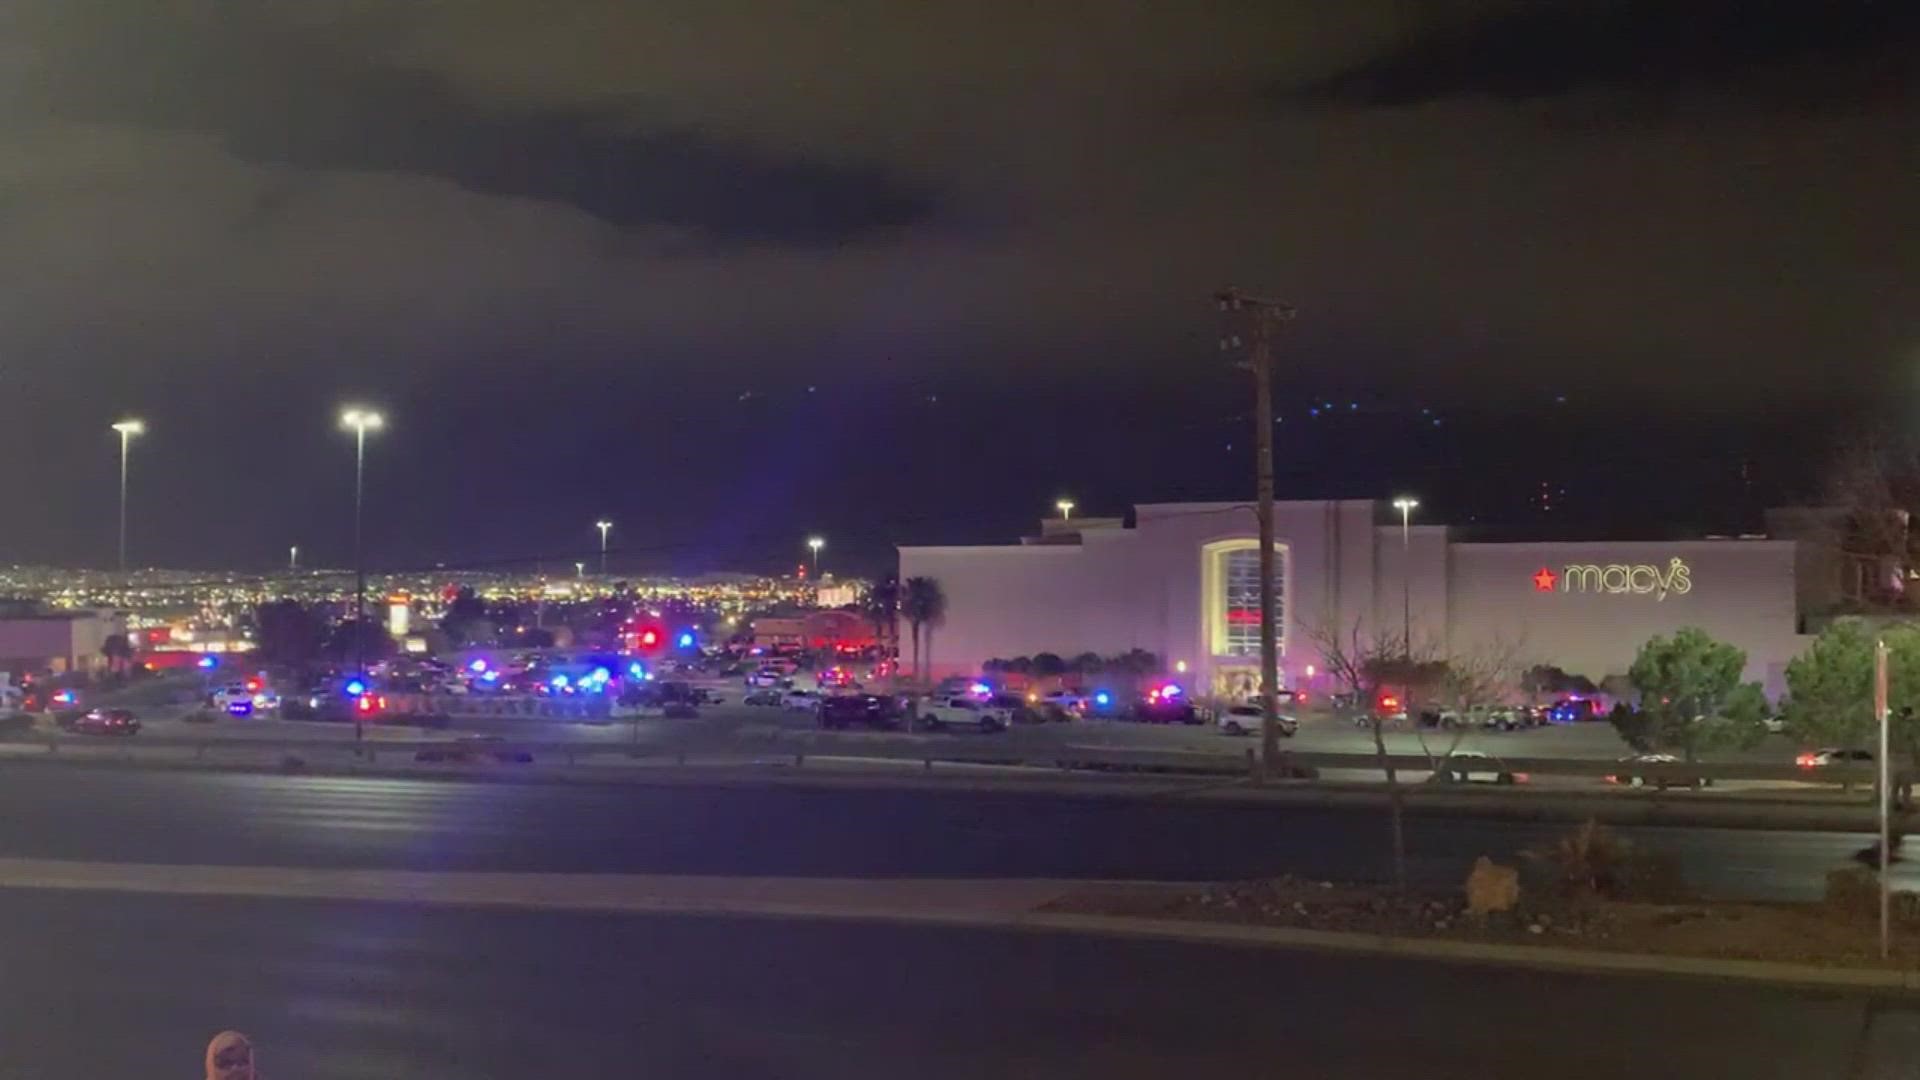 The shooting happened in a busy shopping area and across a large parking lot from a Walmart where 23 people were killed in a racist attack in 2019.